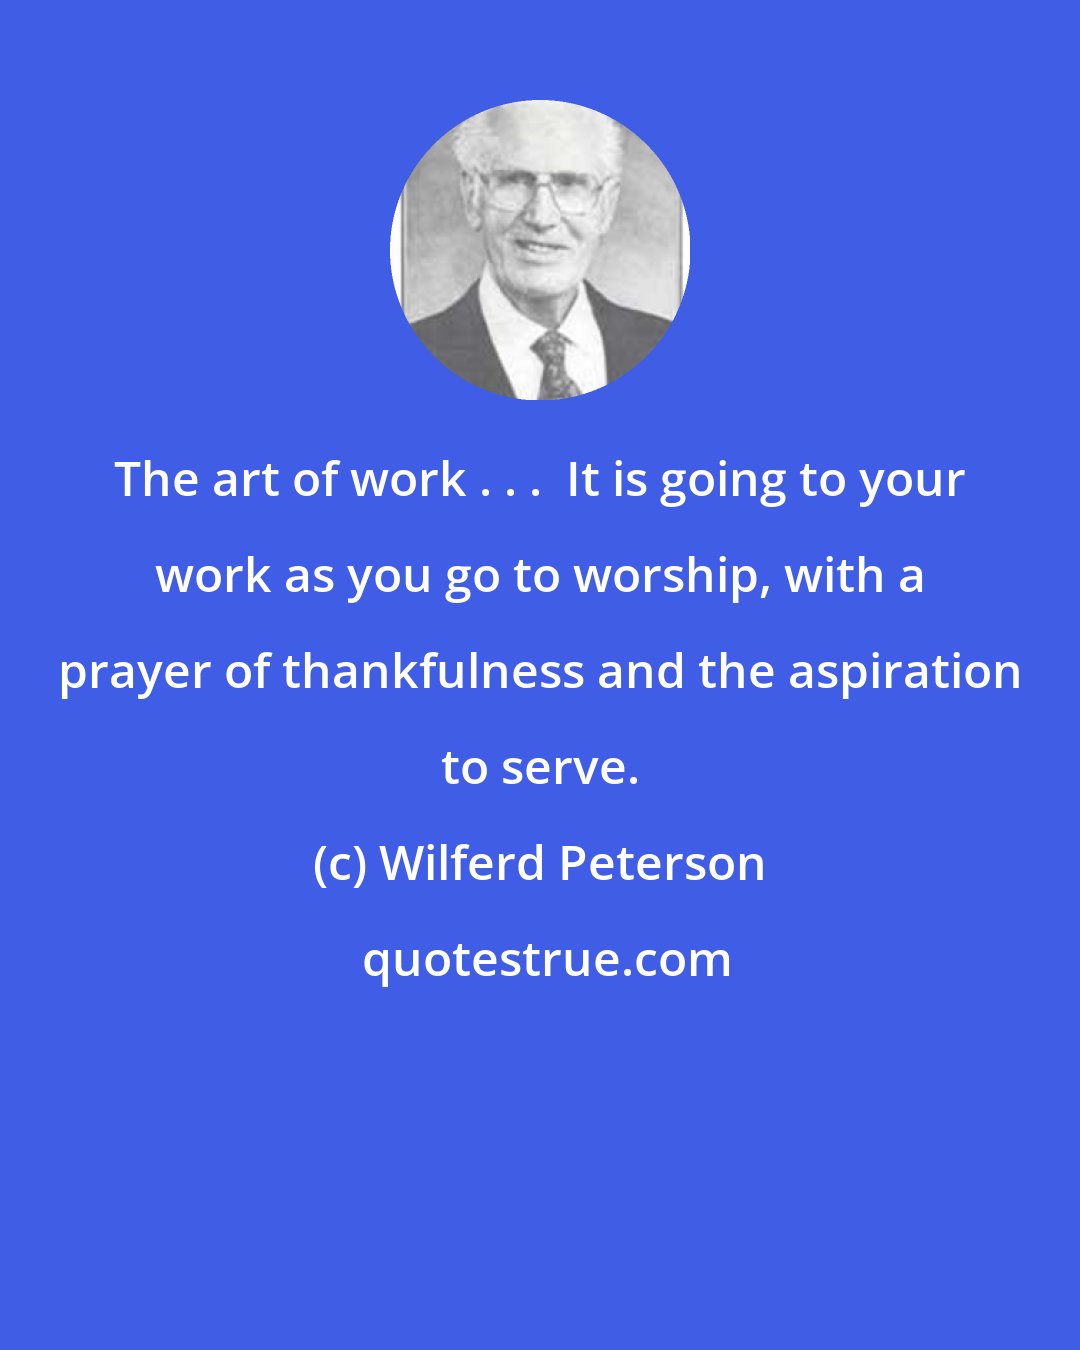 Wilferd Peterson: The art of work . . .  It is going to your work as you go to worship, with a prayer of thankfulness and the aspiration to serve.